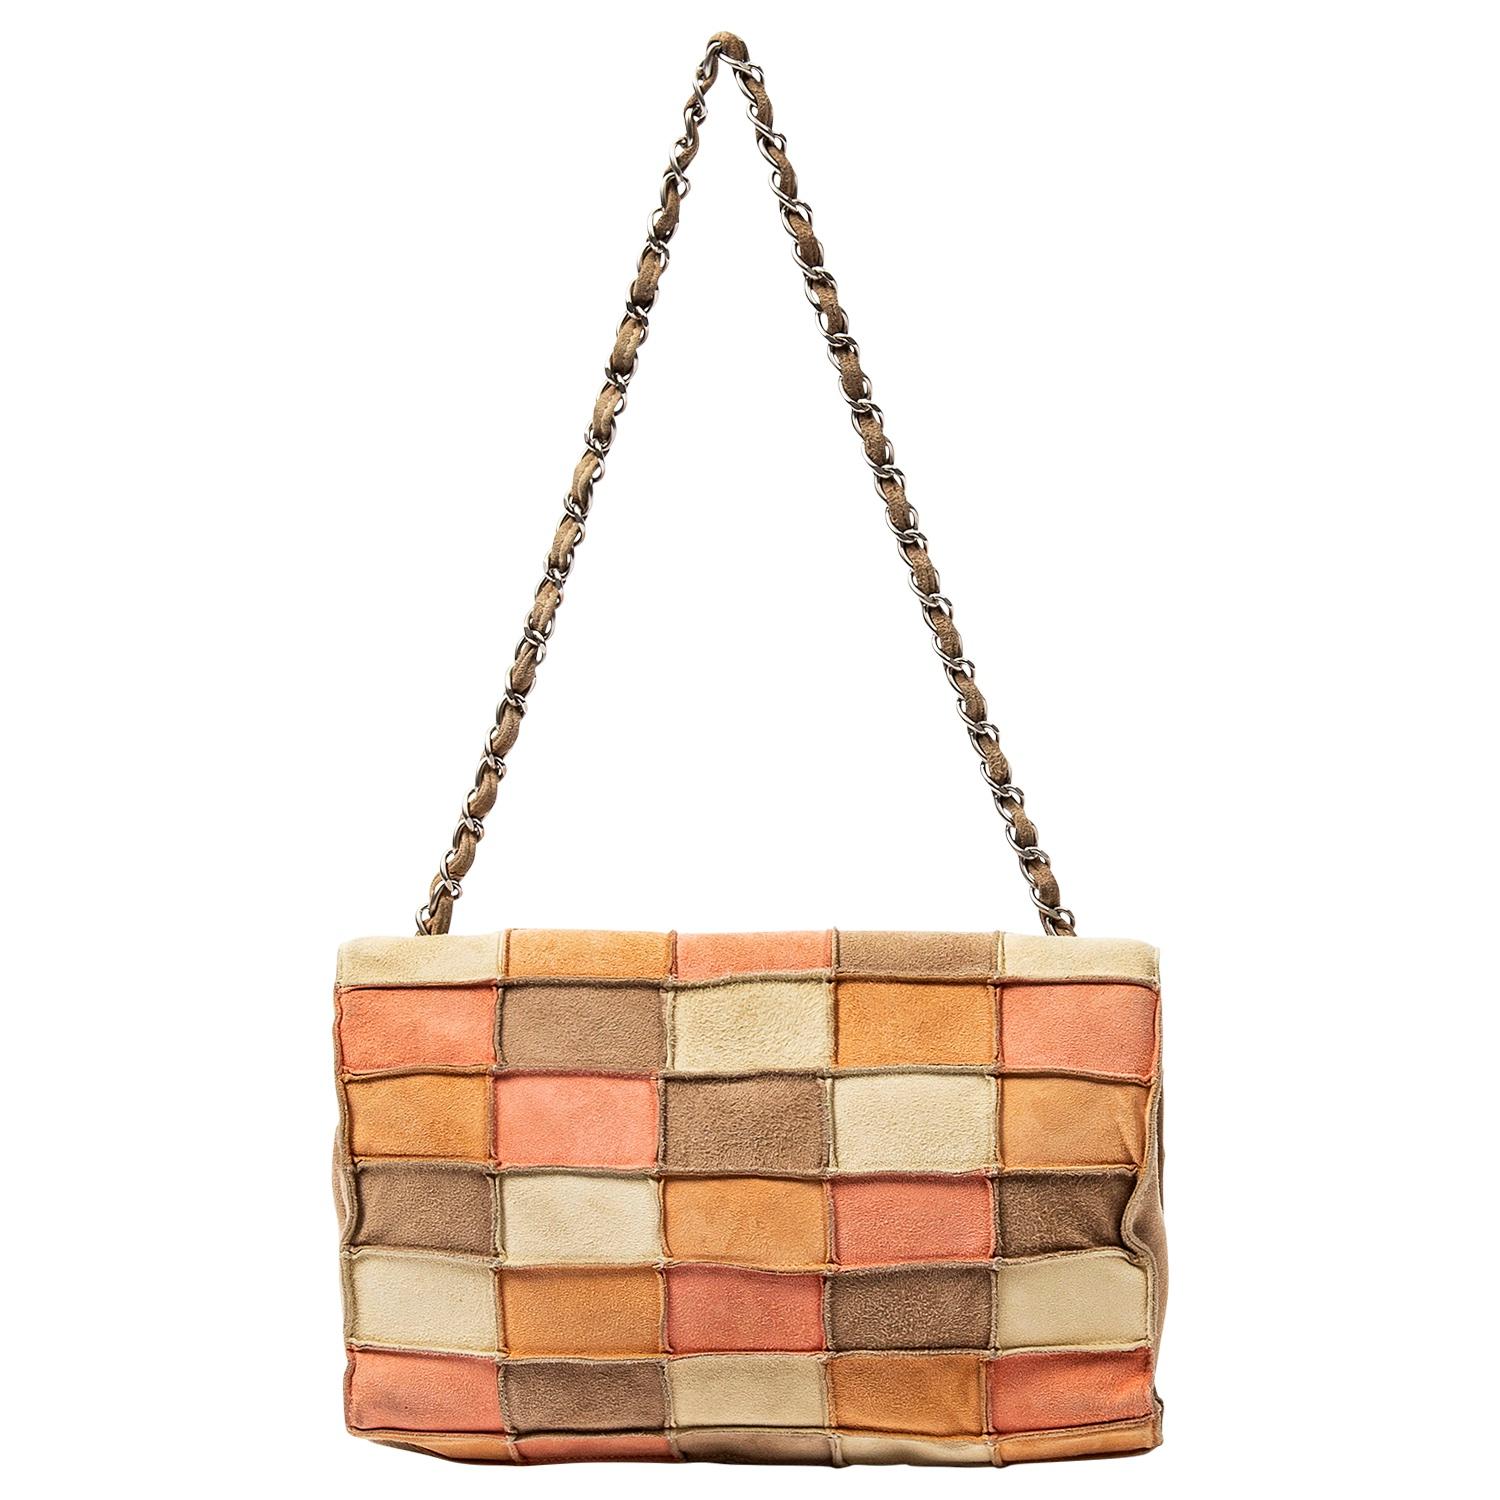 We love this late 90s beauty with a cool nod to mid century modern vibes with its fun patchwork motif! This is a trendsetting limited piece that is a vintage collectors dream. Crafted in peach/beige/ivory/multi suede with brushed silver-tone